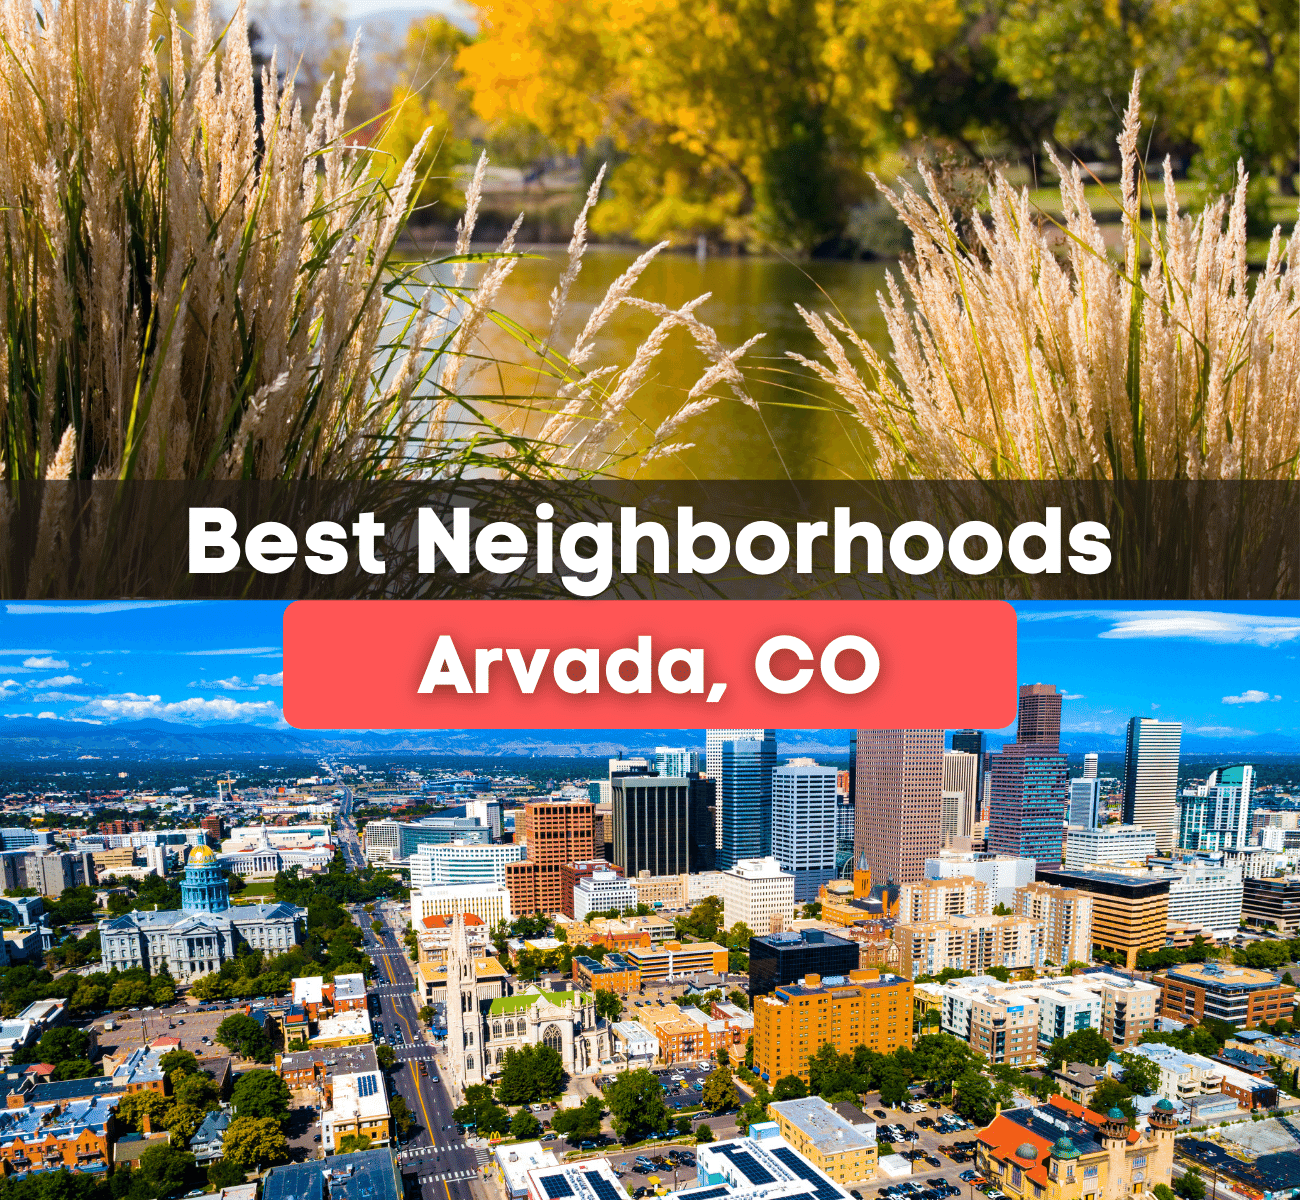 Best Neighborhoods in Arvada, CO - What are the best places to live in Arvada?